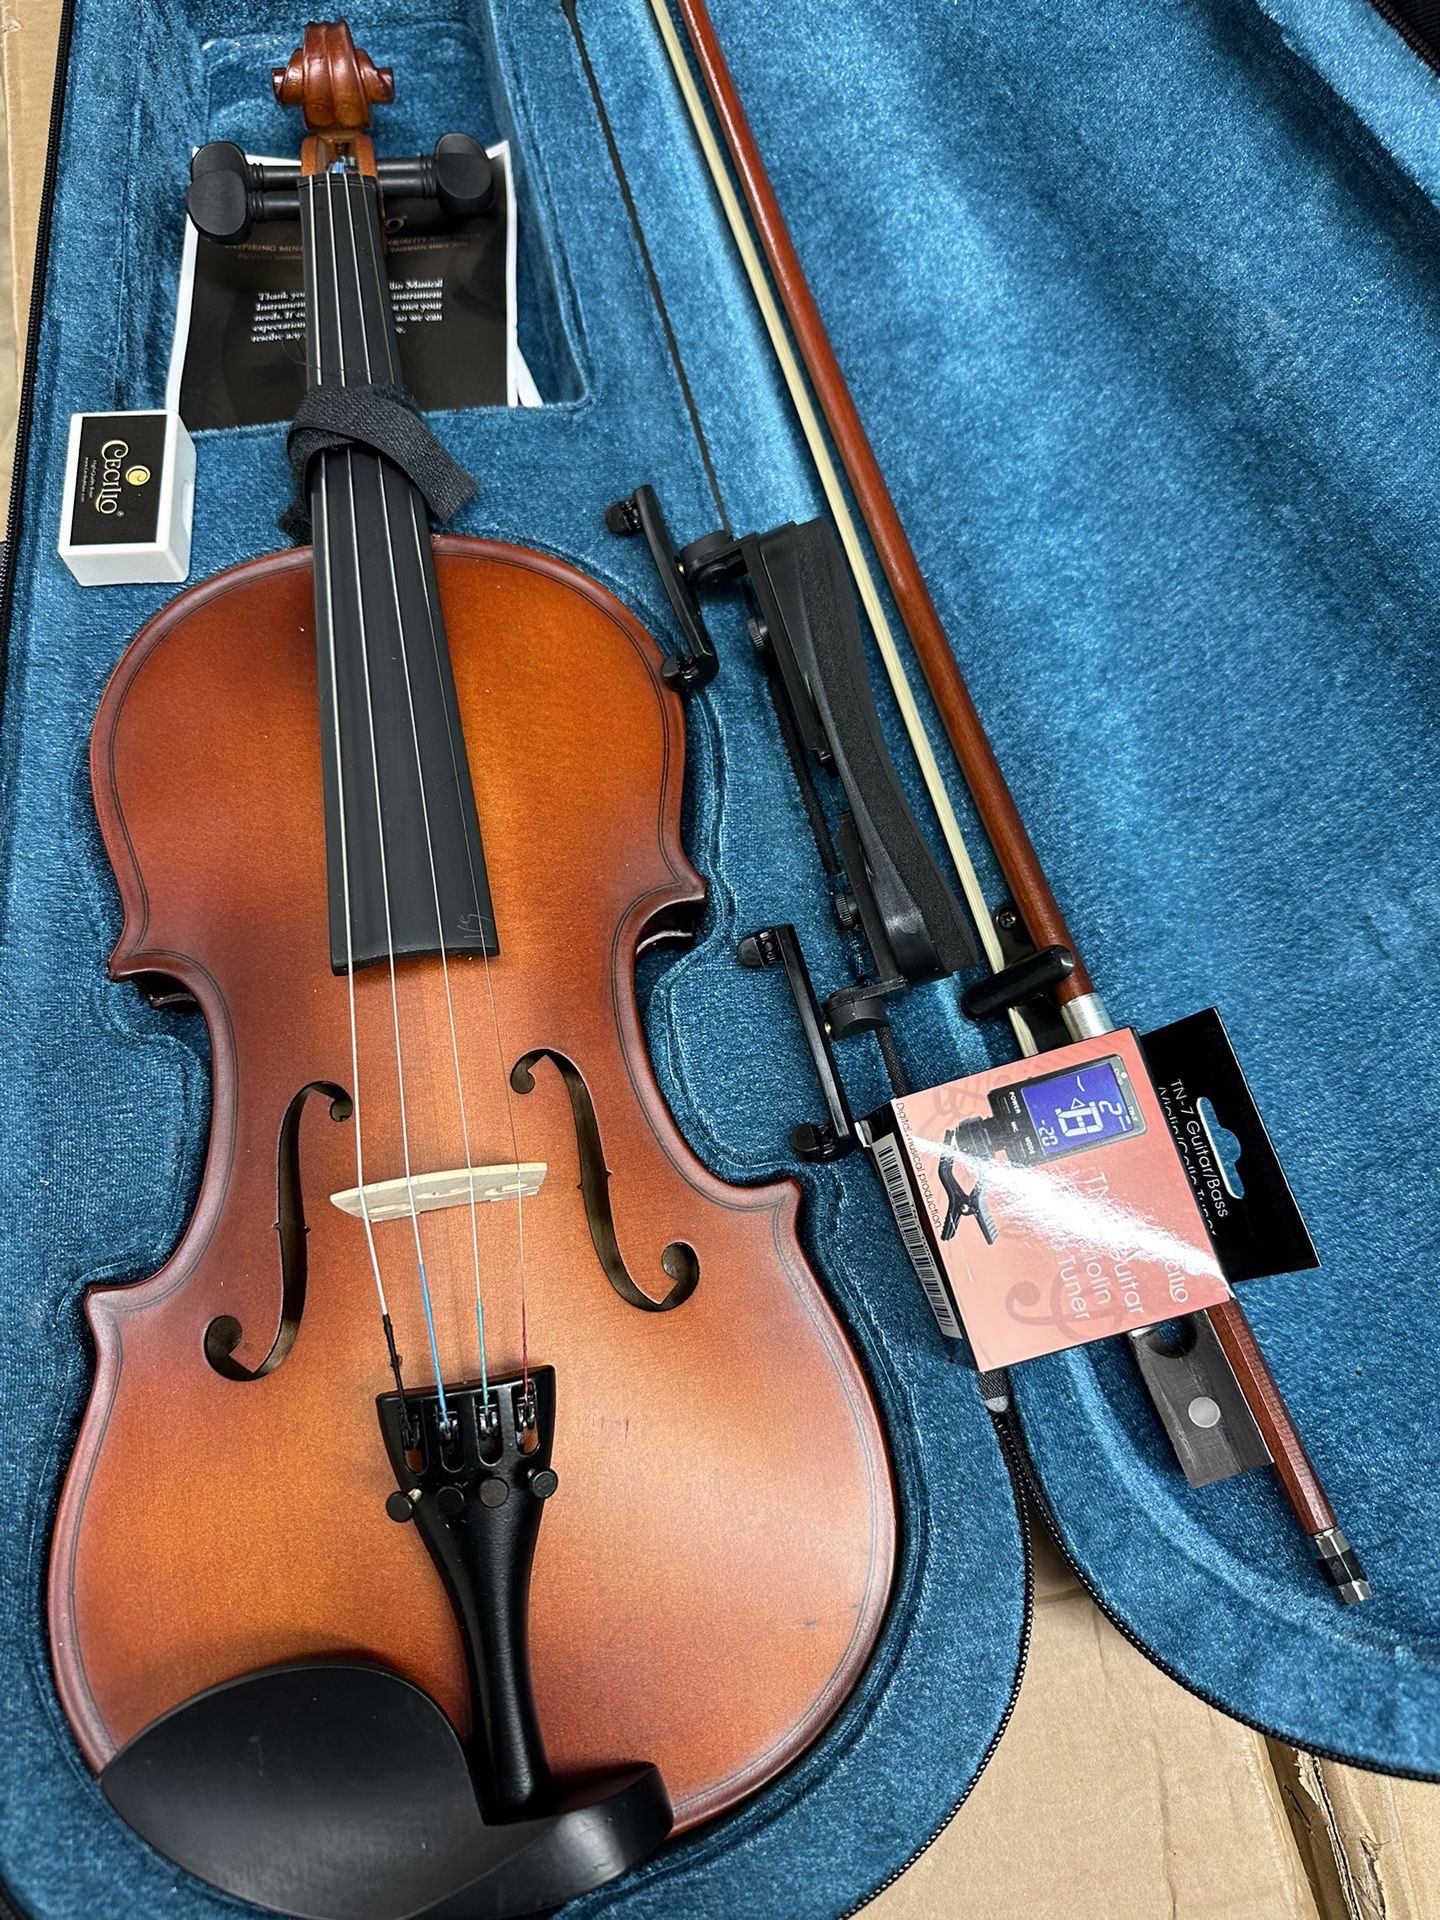 3/4 Size Violin with New Bow, Digital Tuner, Shoulder Rest, Extra Strings $130 Firm